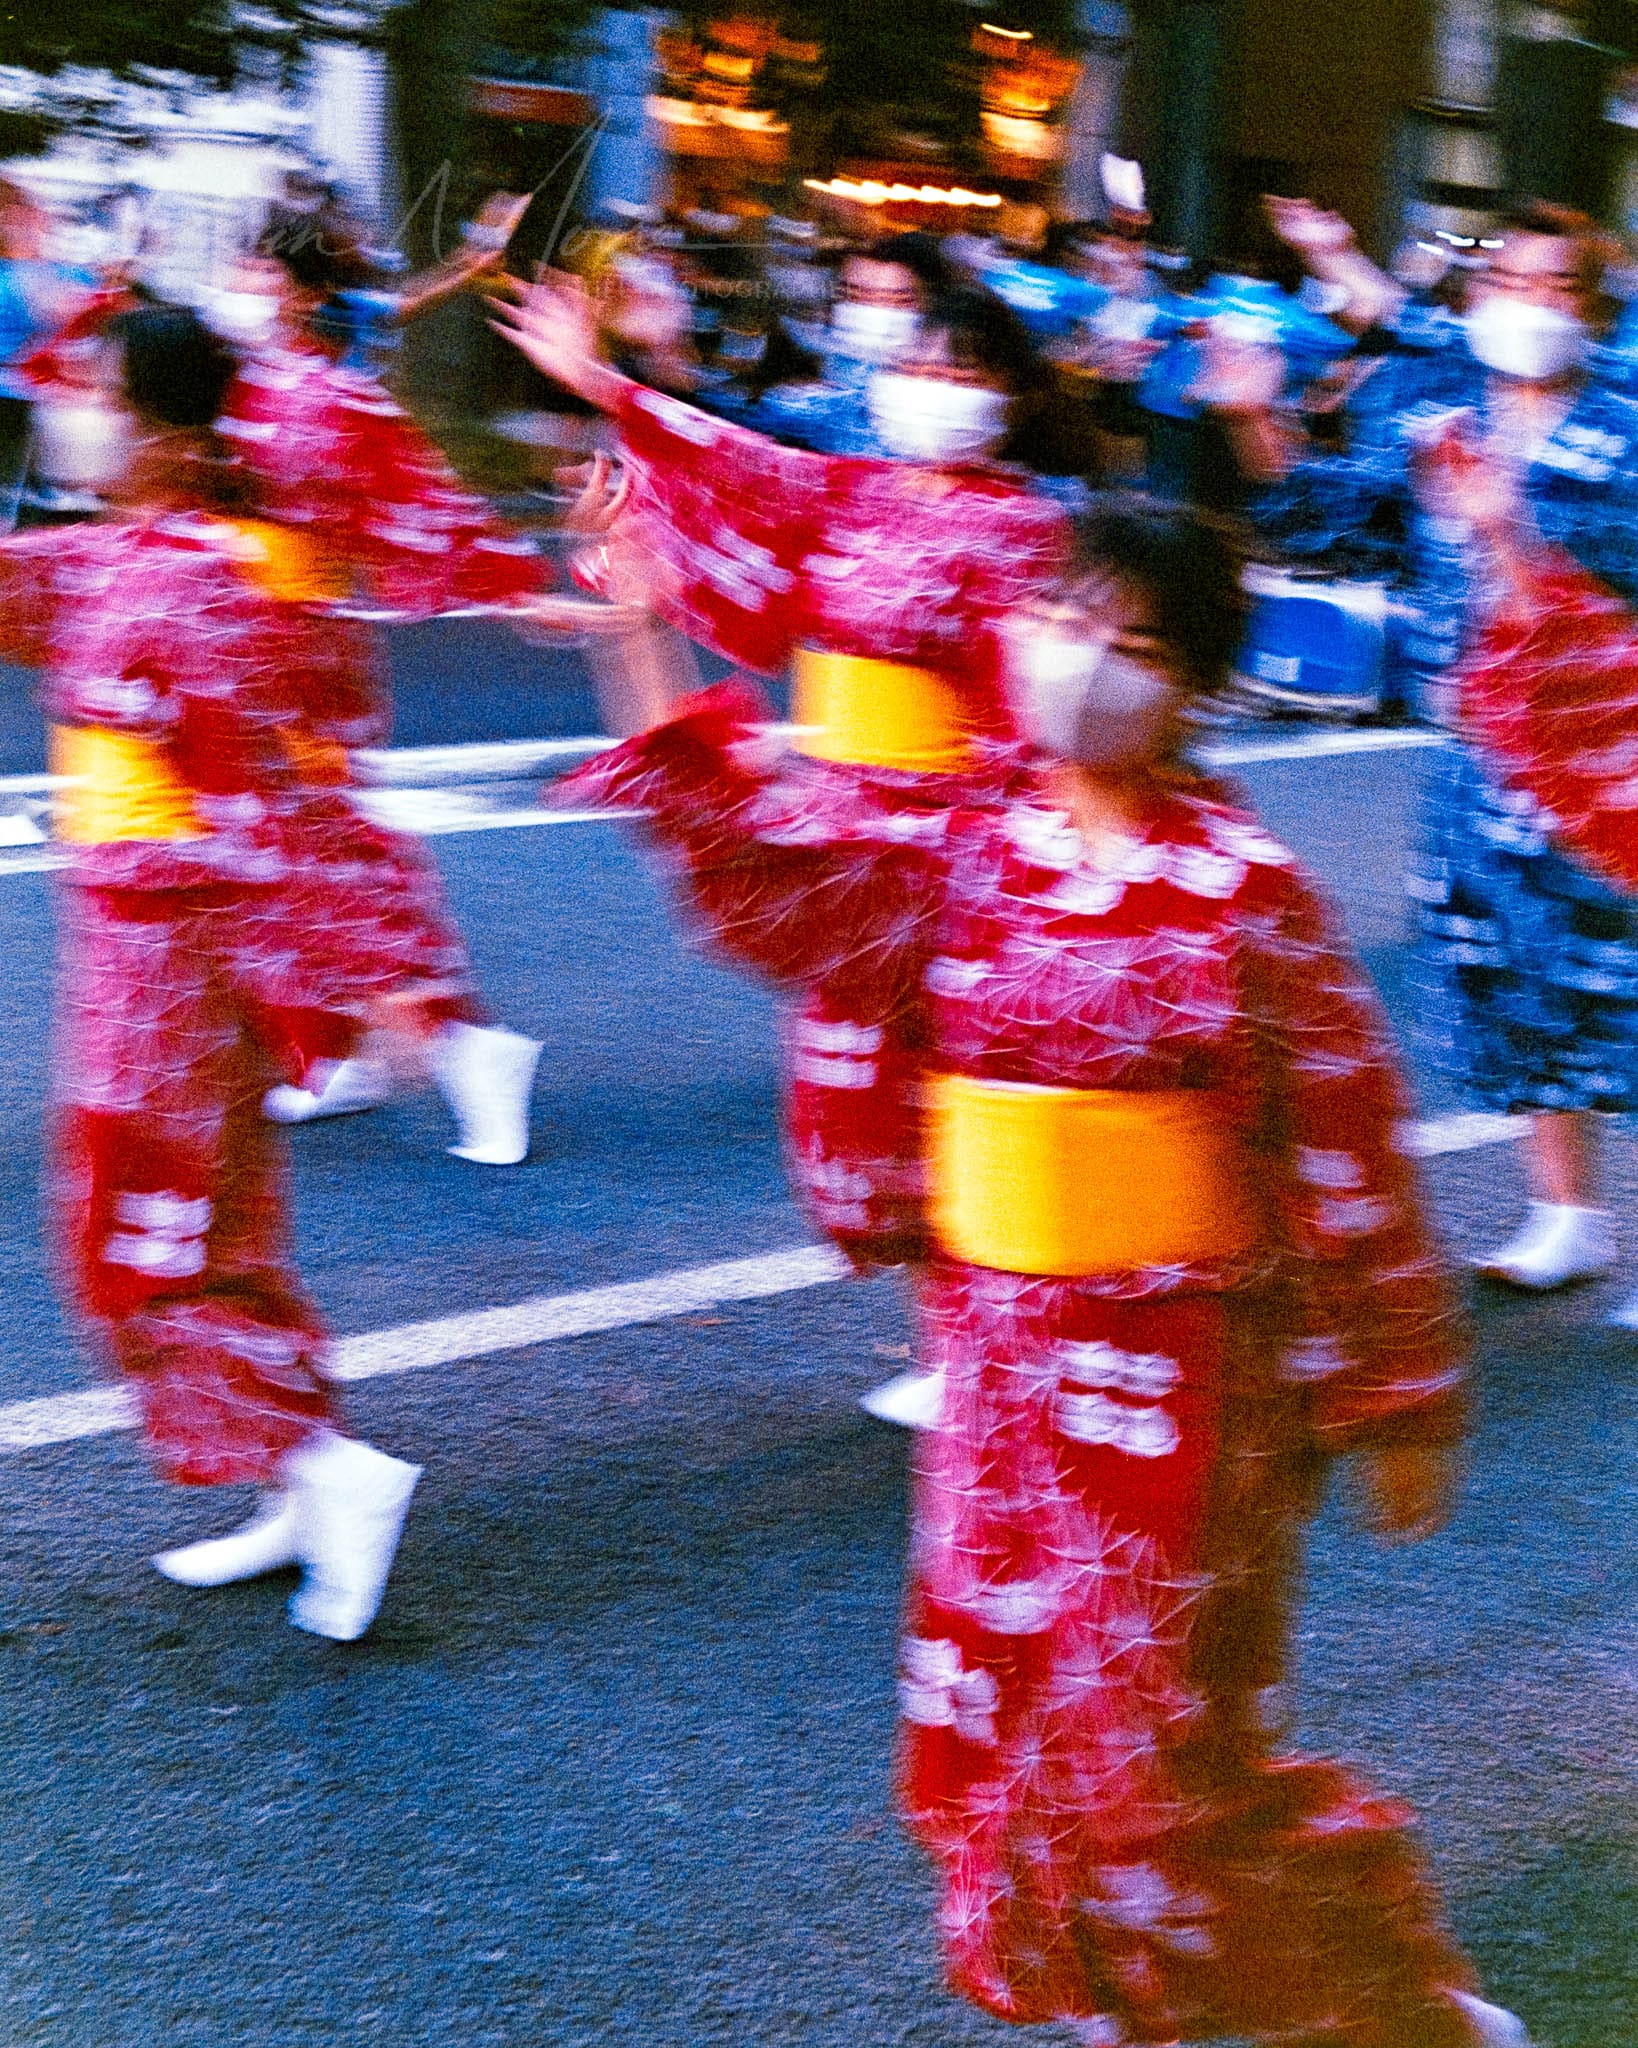 Enthusiastic dancers in vibrant yukatas performing at a lively Japanese cultural festival in an urban setting.